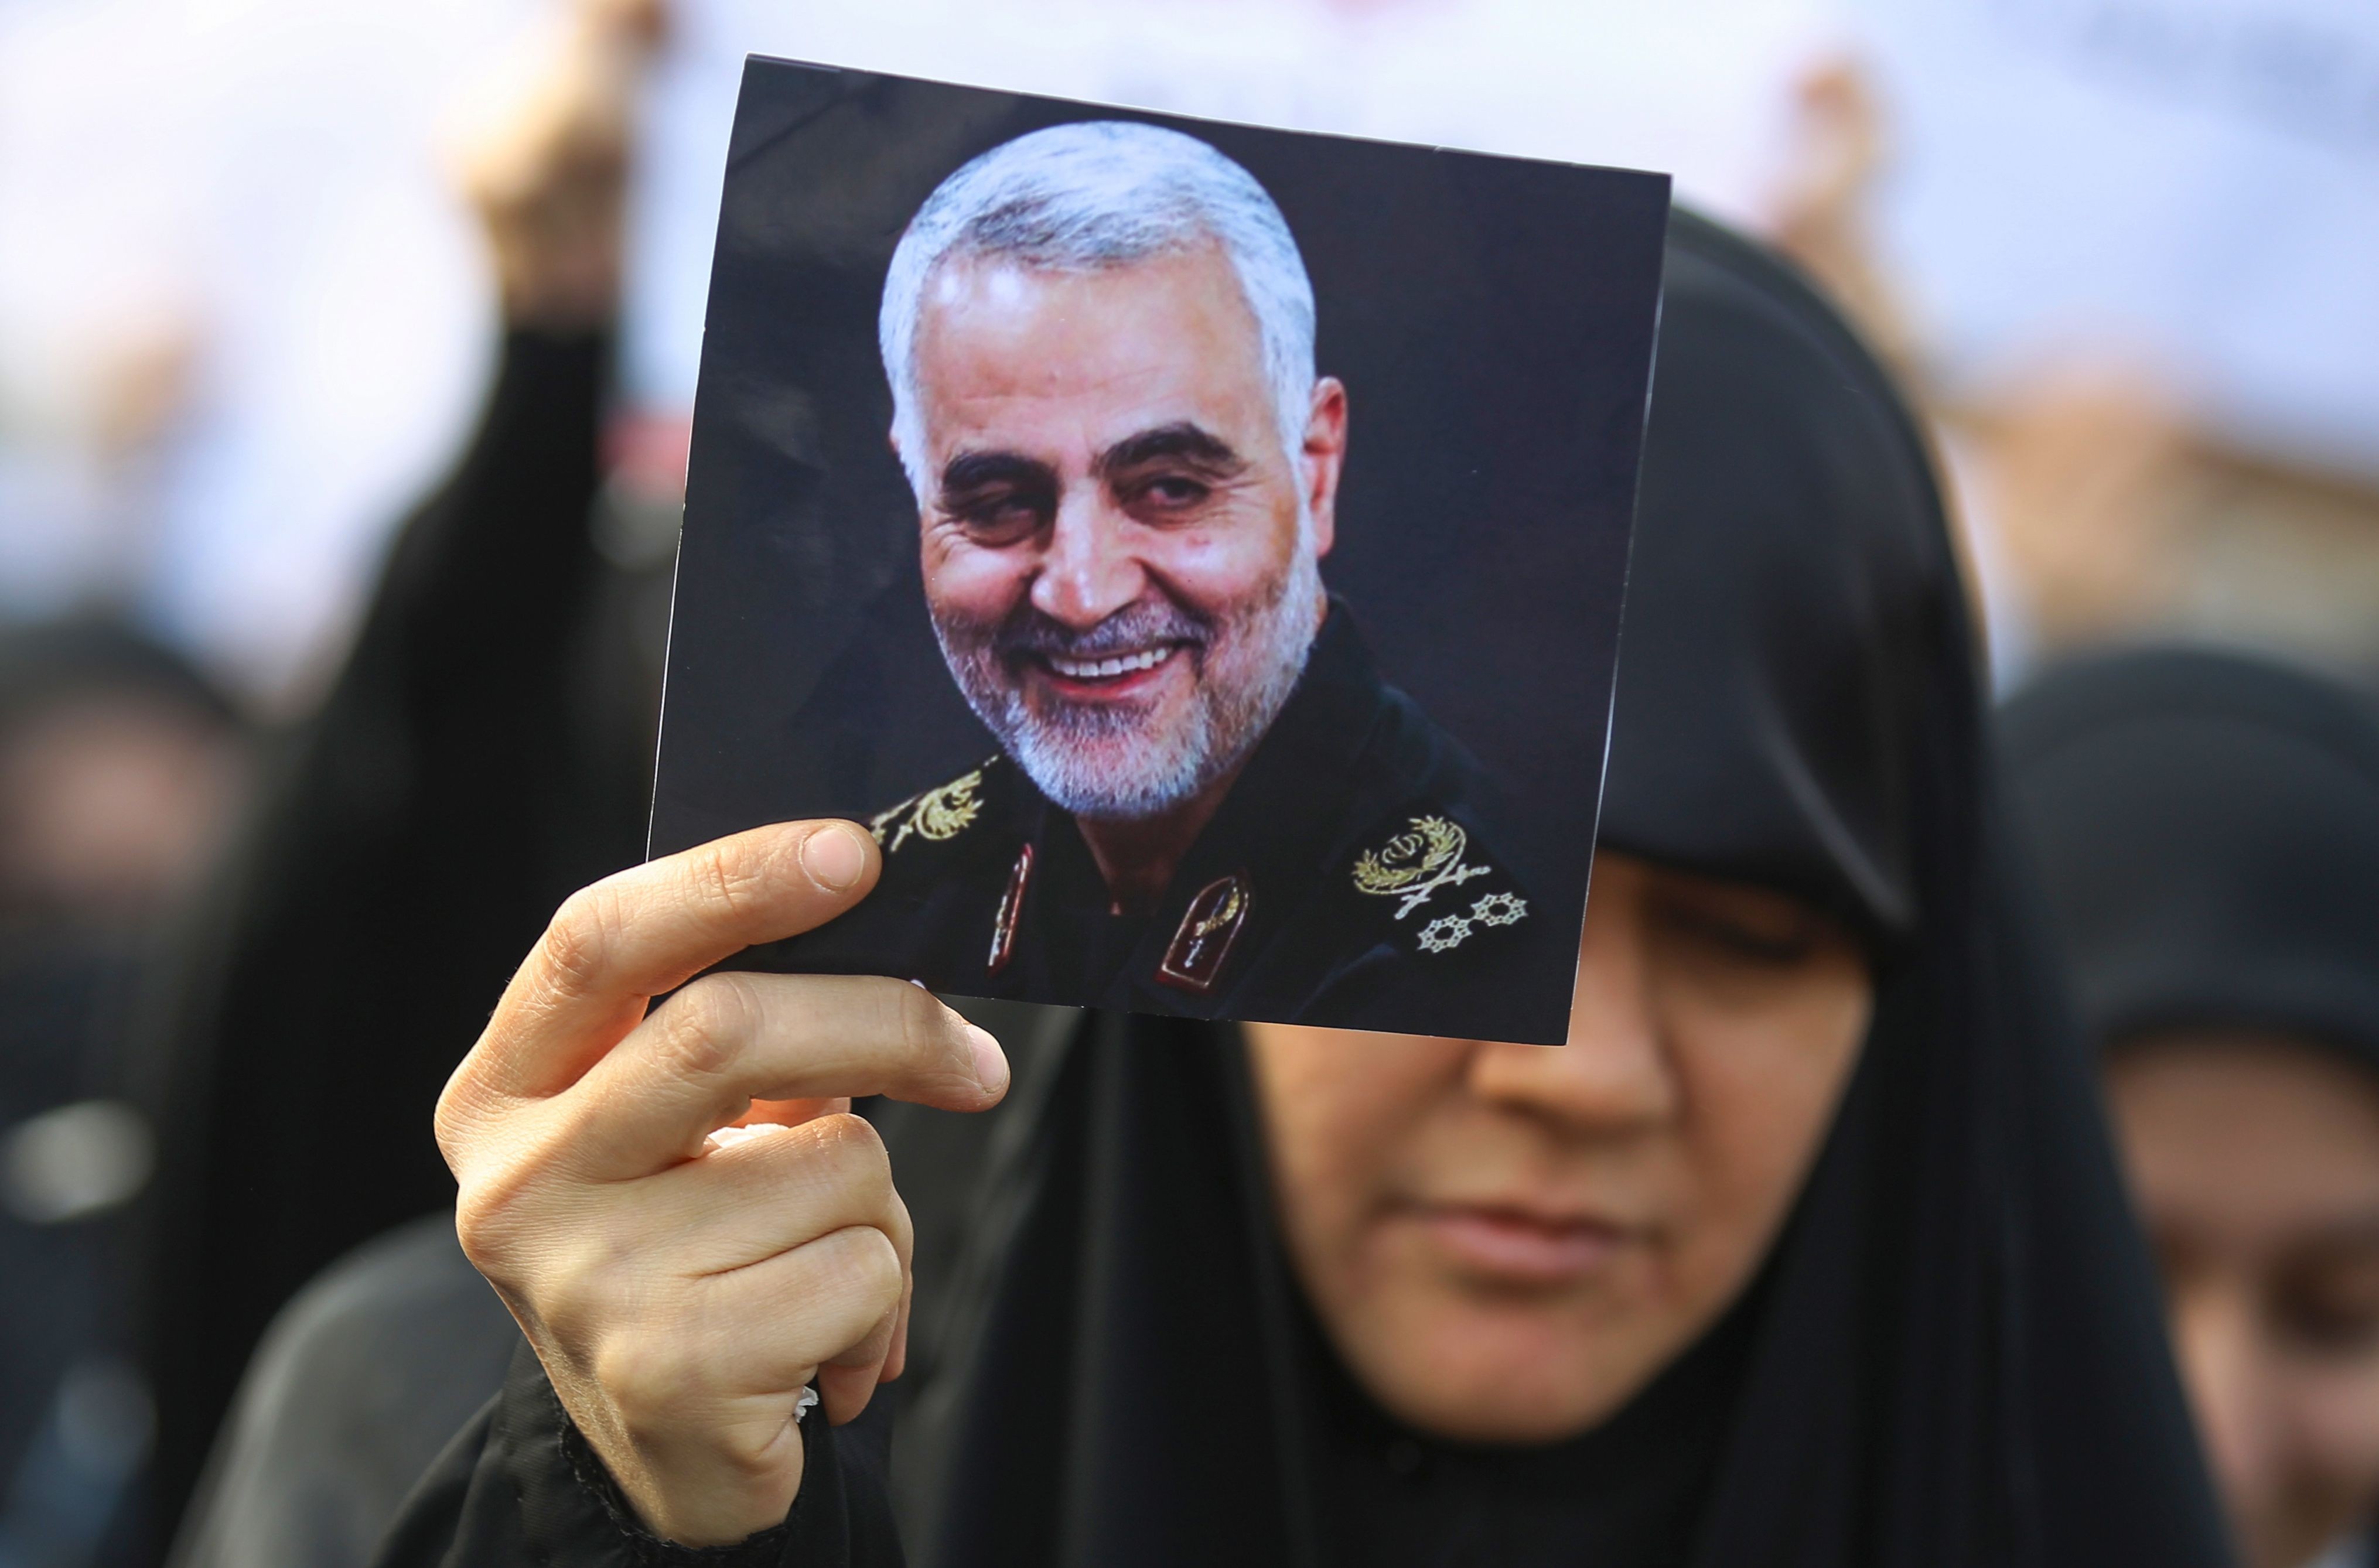 An Iraqi woman attends the funeral of Iranian military commander Qassem Soleimani. Photo: AFP